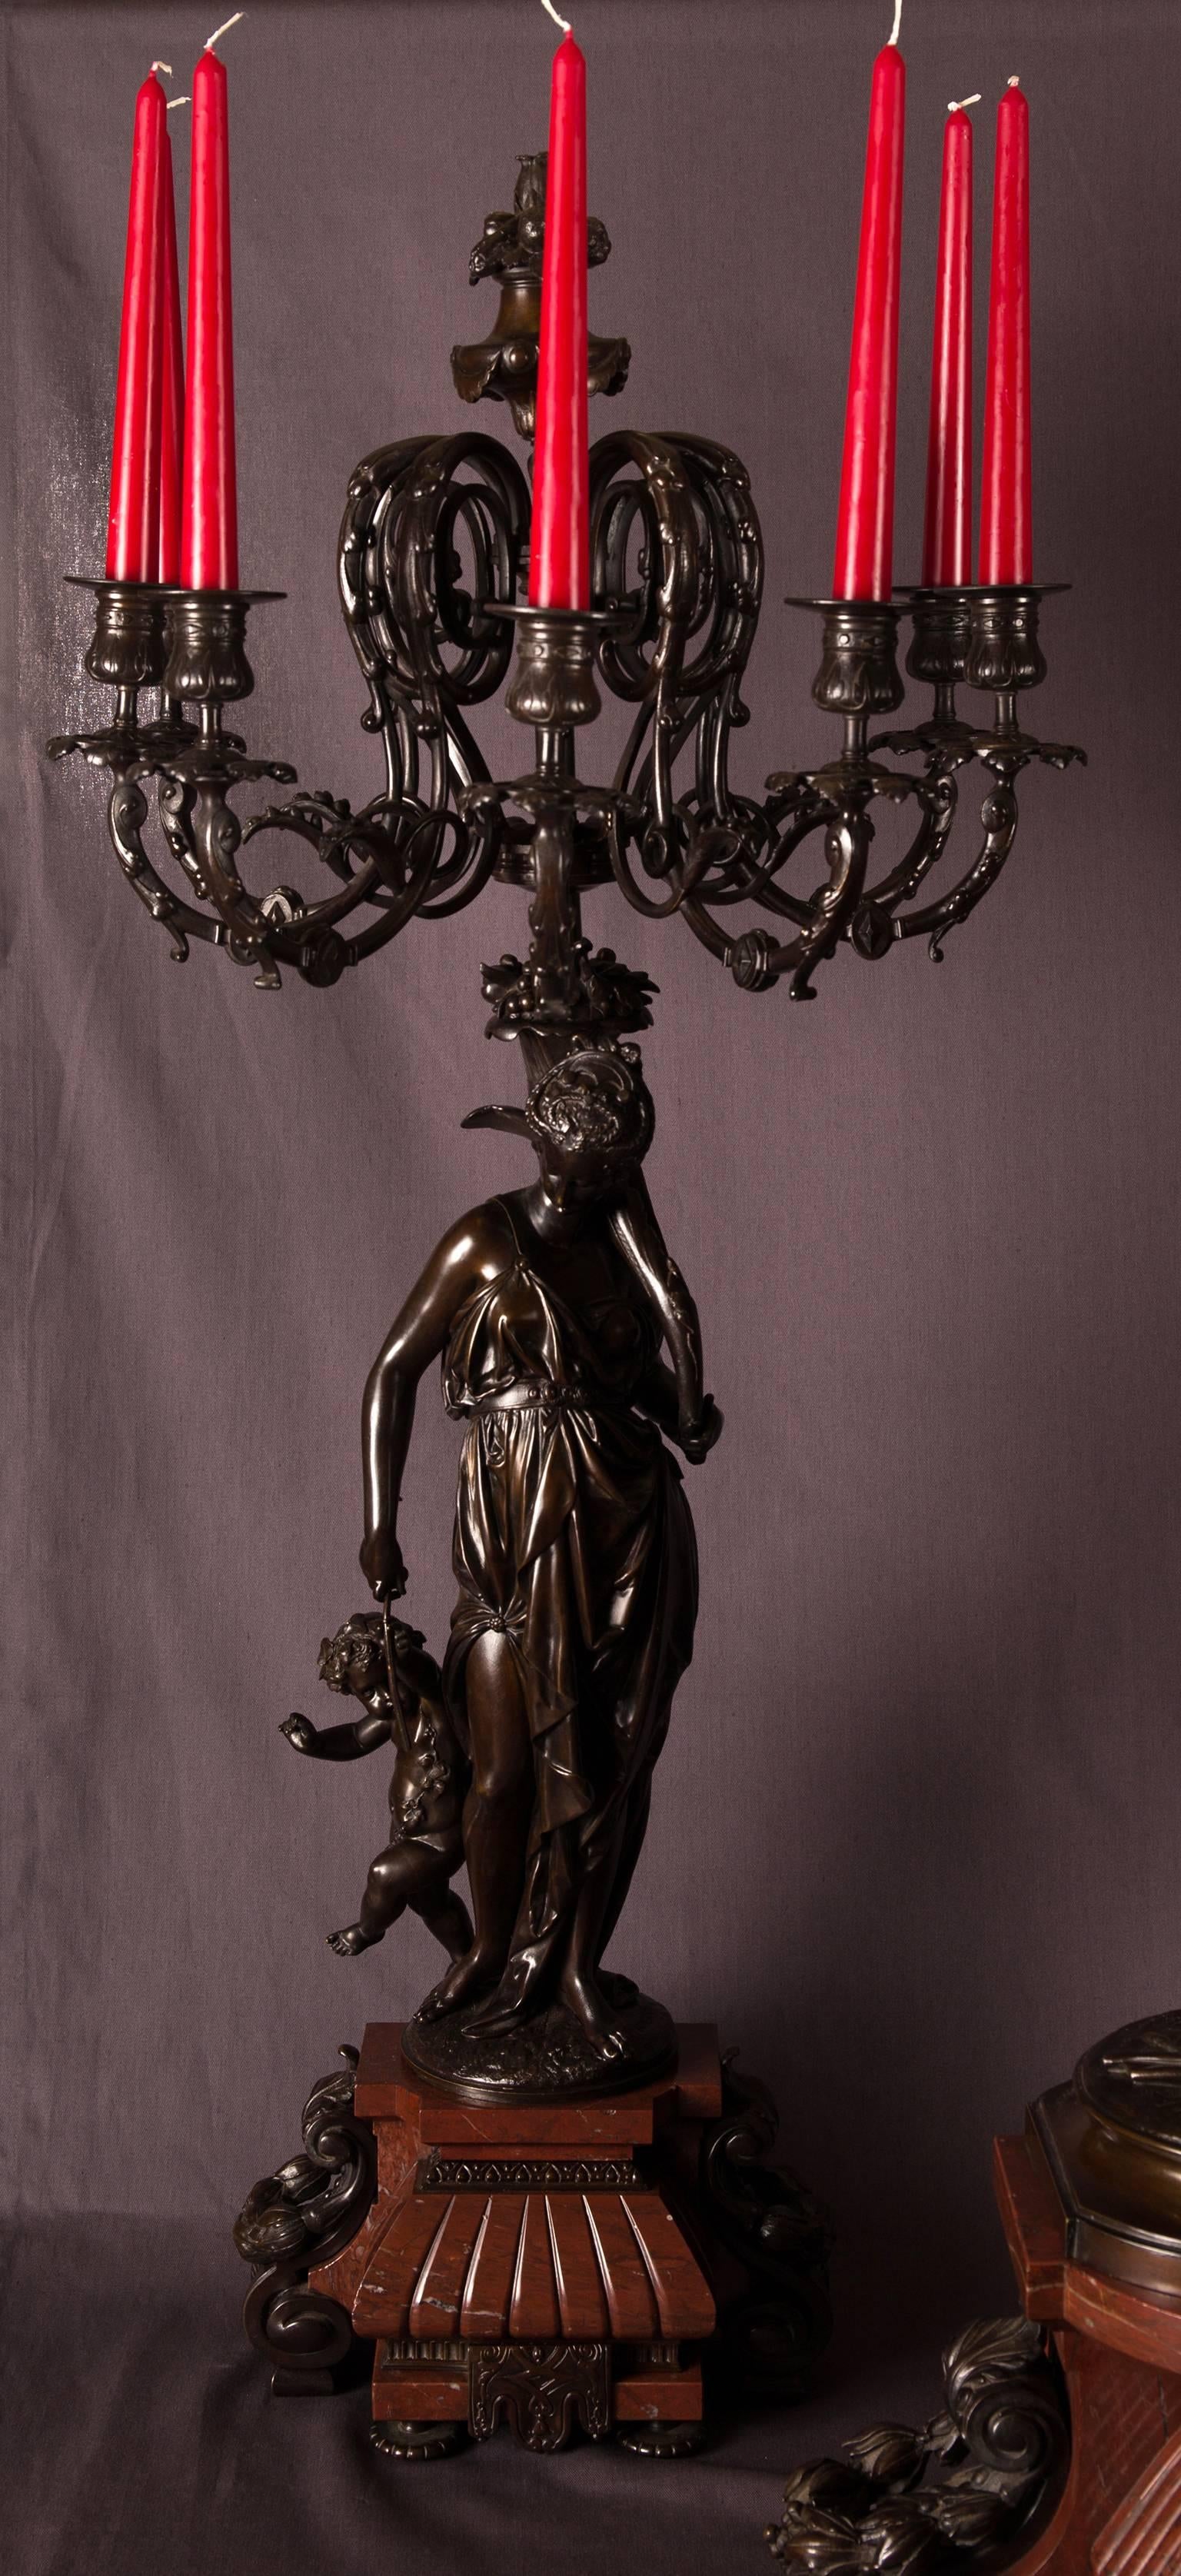 Impressive patinated bronze mantel clock garniture representing Daphnis and Chloe on top of the clock and a pair of seven-light candelabra each with a nymph and putto that hold the candleholders, coming out from cornucopia. The bases are made of